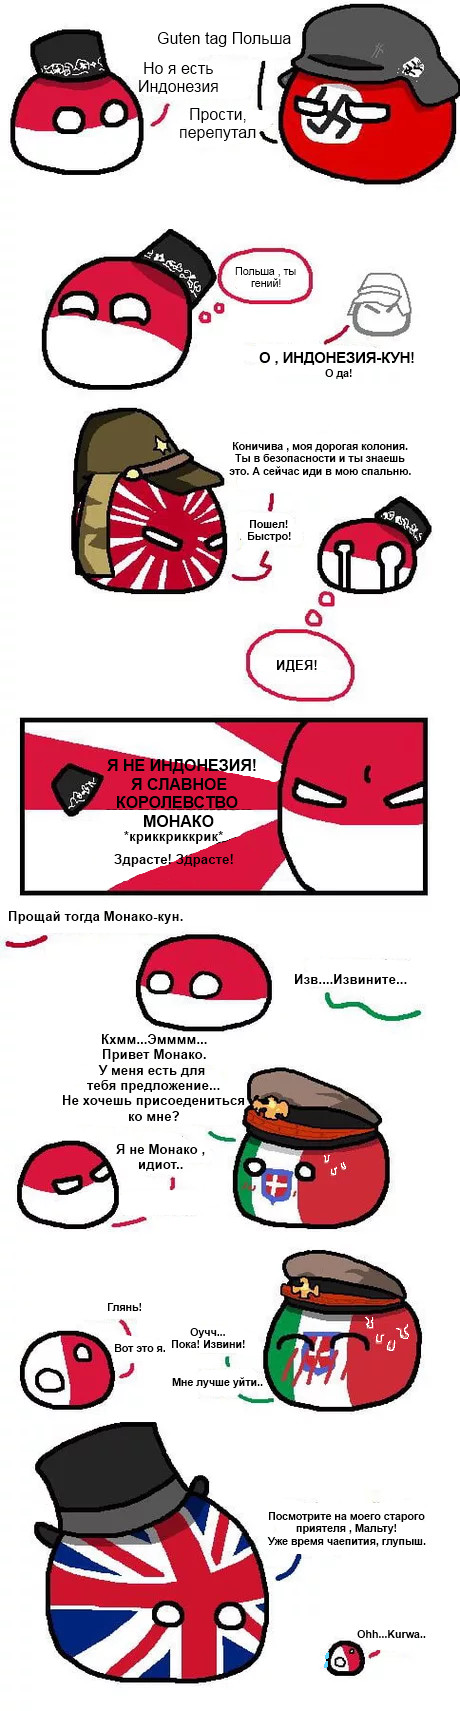 You can't escape fate - Countryballs, Poland, Germany, Japan, Great Britain, Italy, Longpost